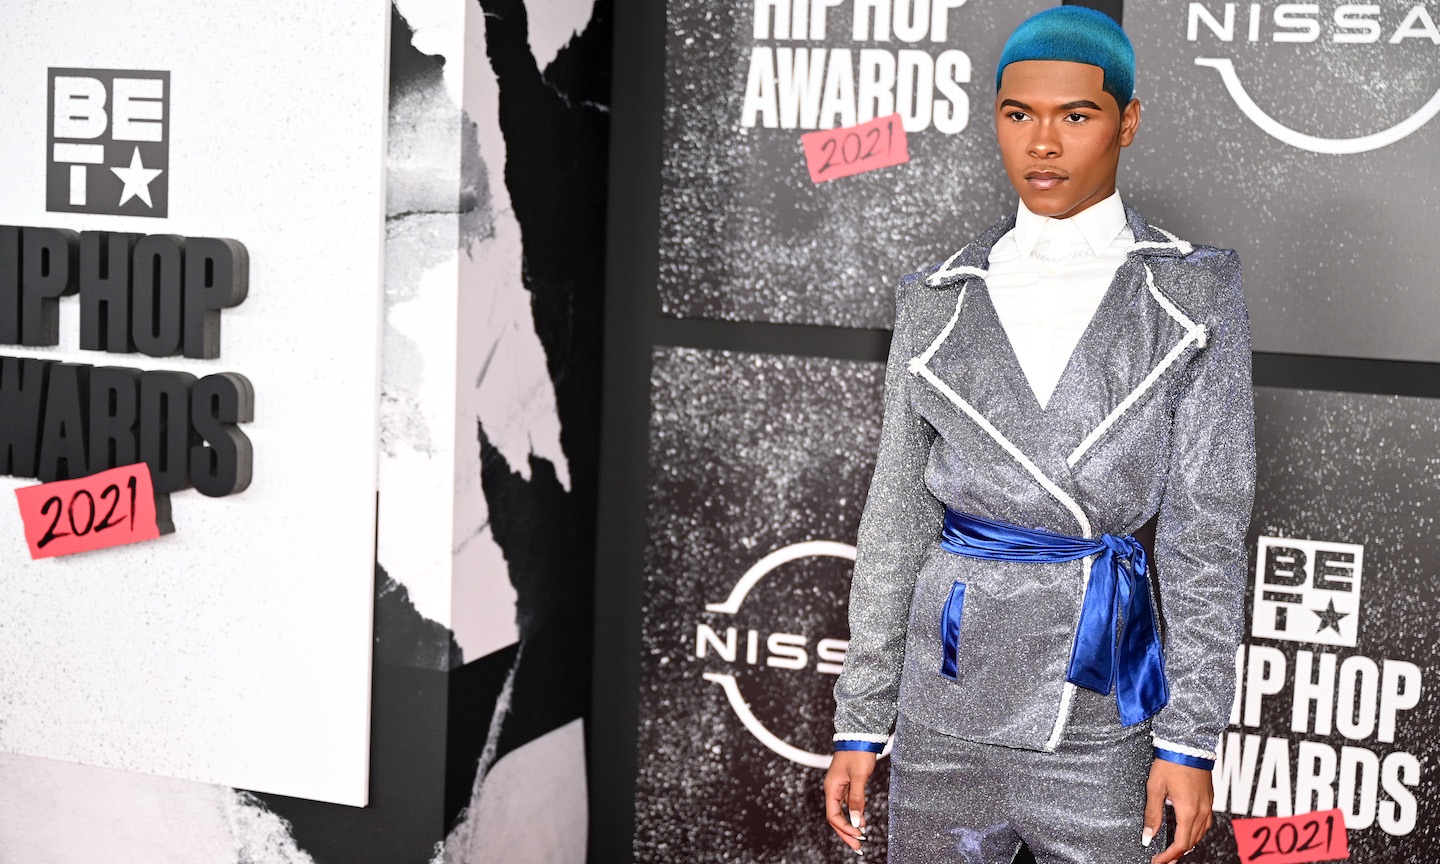 BET Awards Led By Kidd Kenn Cypher, Wins From Lil Baby And More